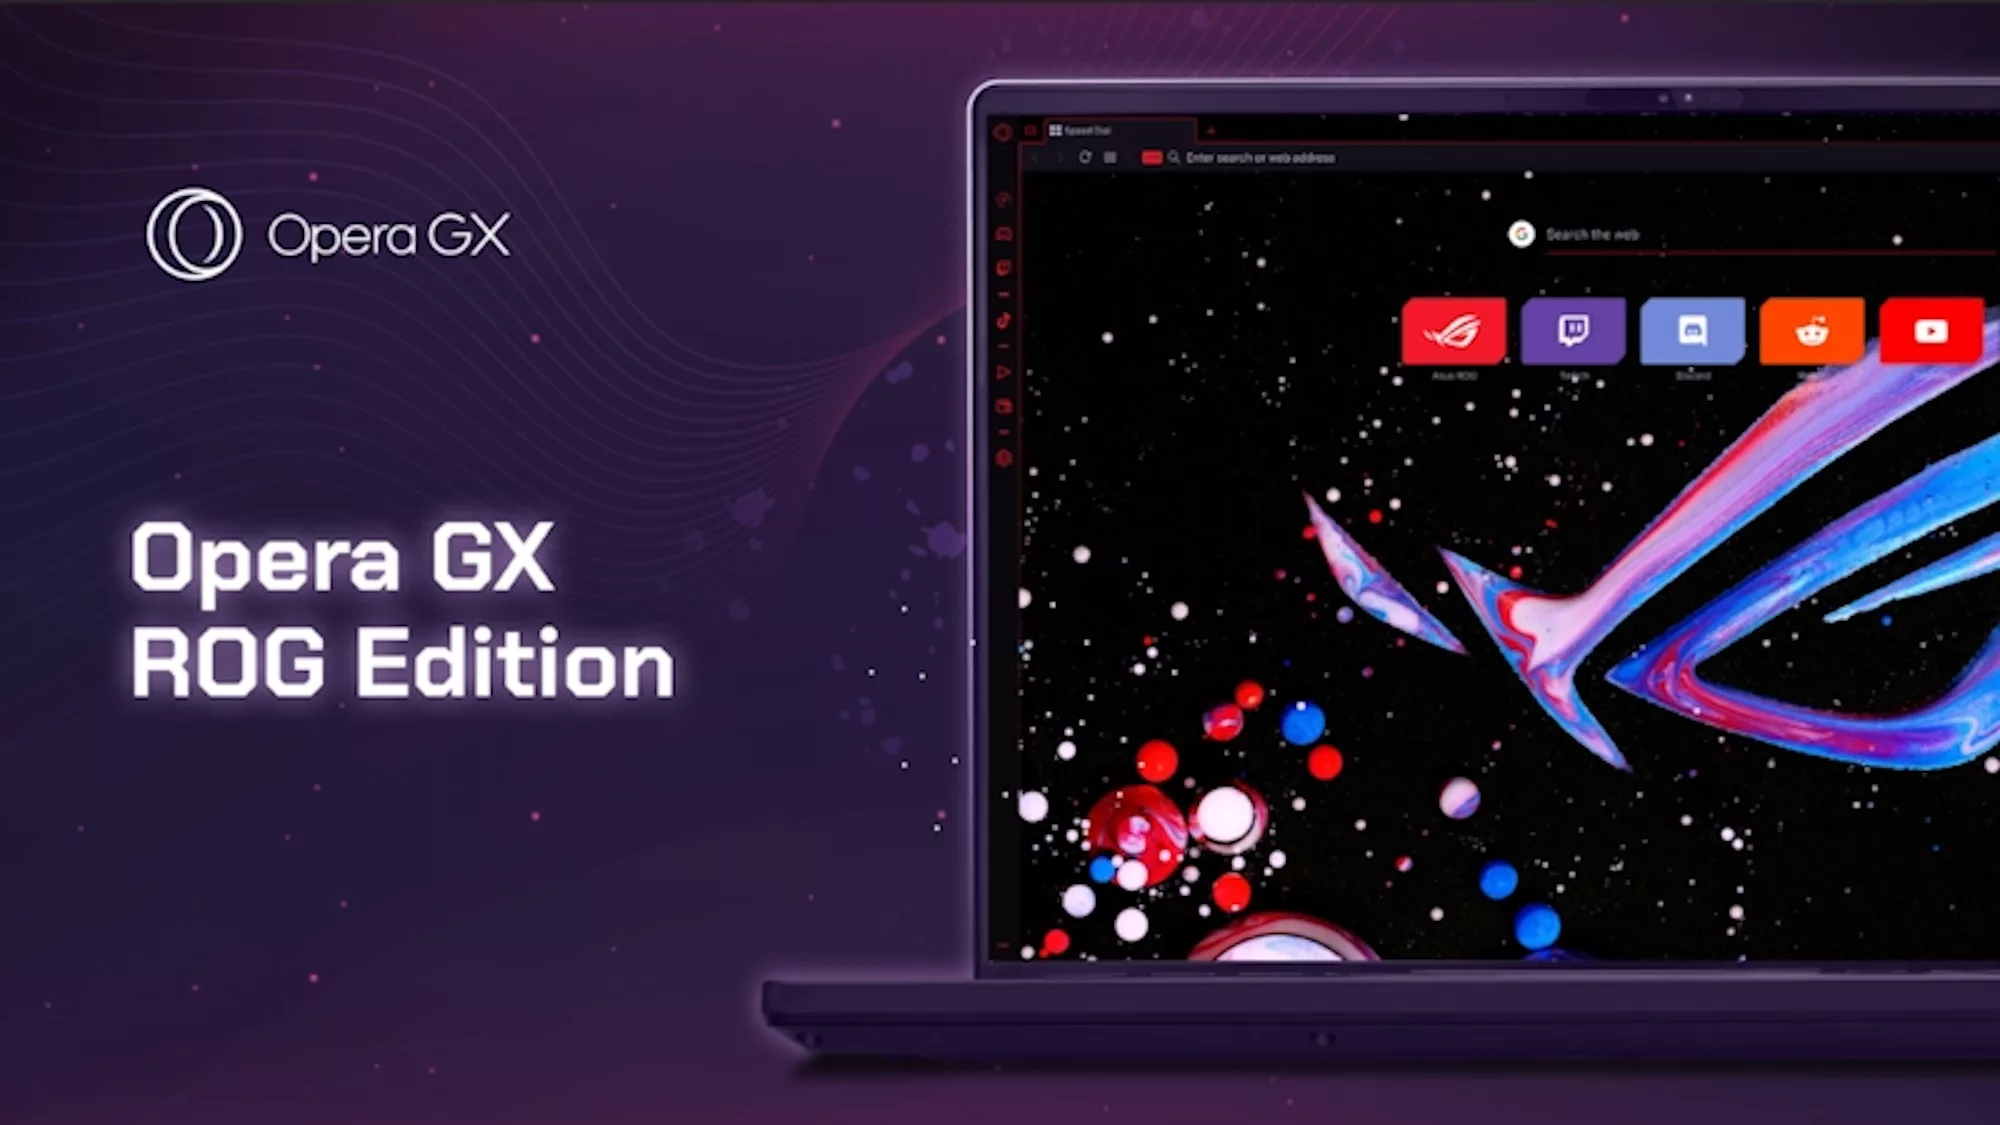 An infographic showing a laptop with the Opera GX ROG Edition browser